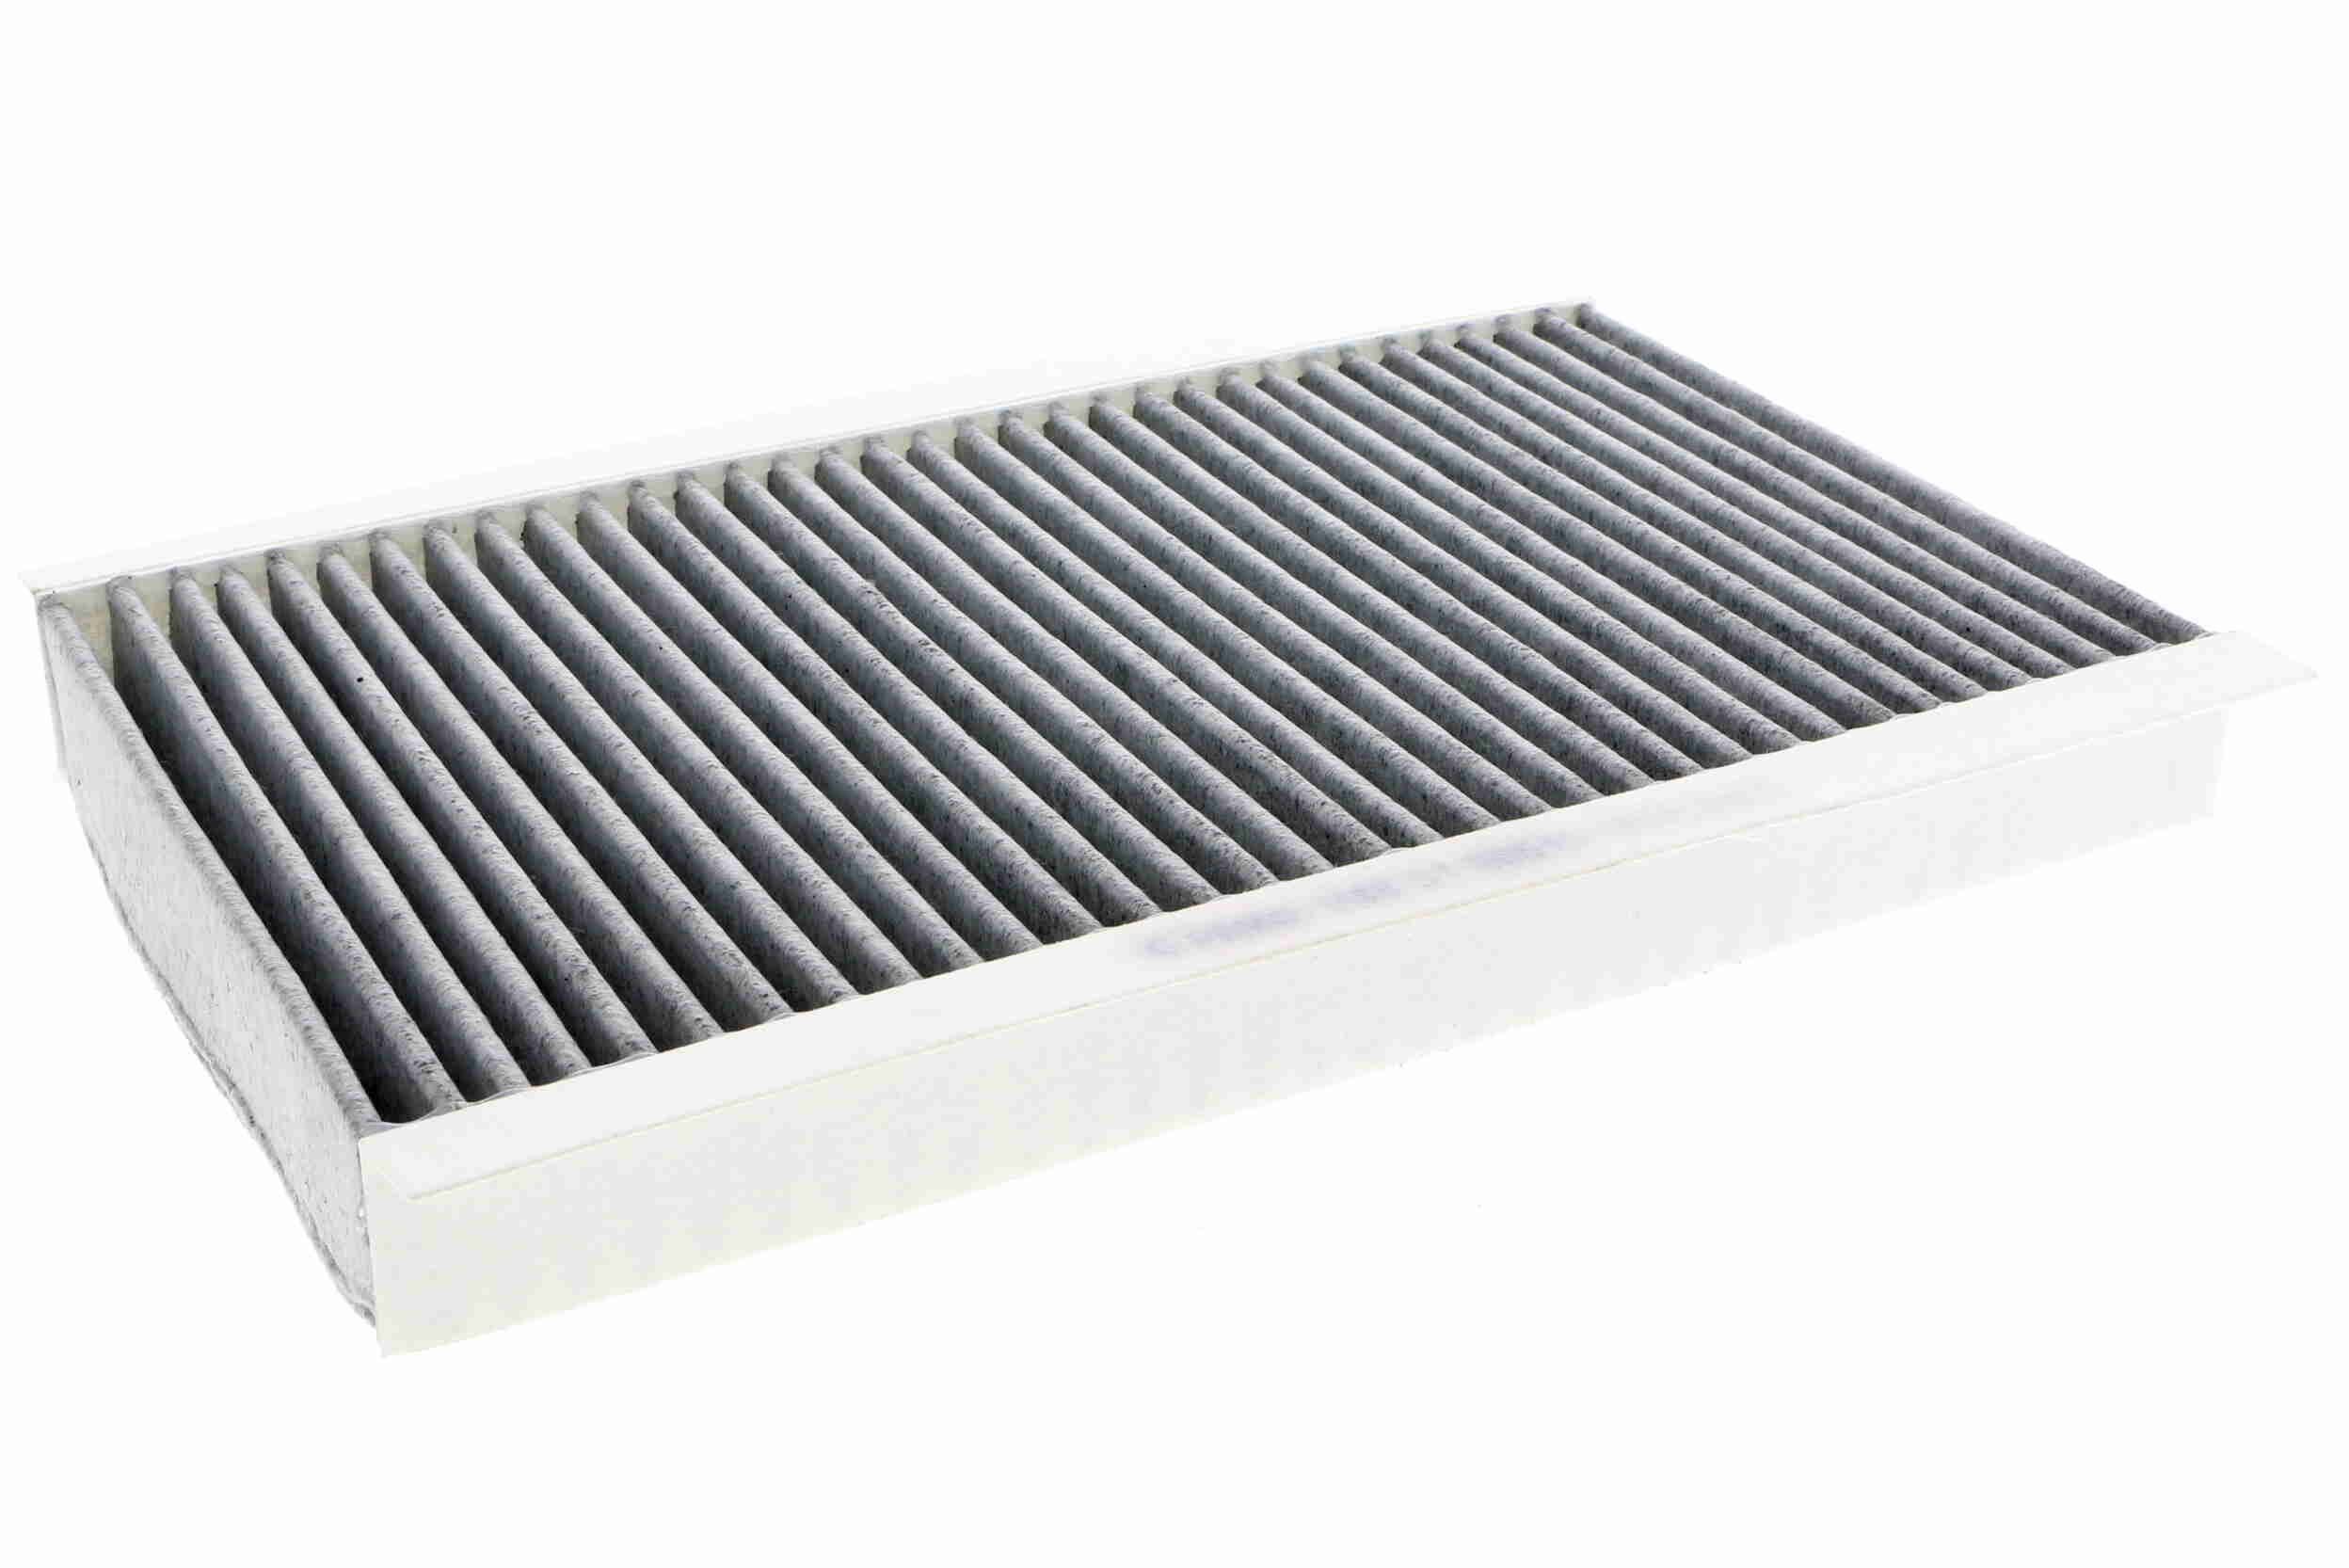 VEMO Air conditioning filter V48-31-0001 for LAND ROVER DISCOVERY, RANGE ROVER